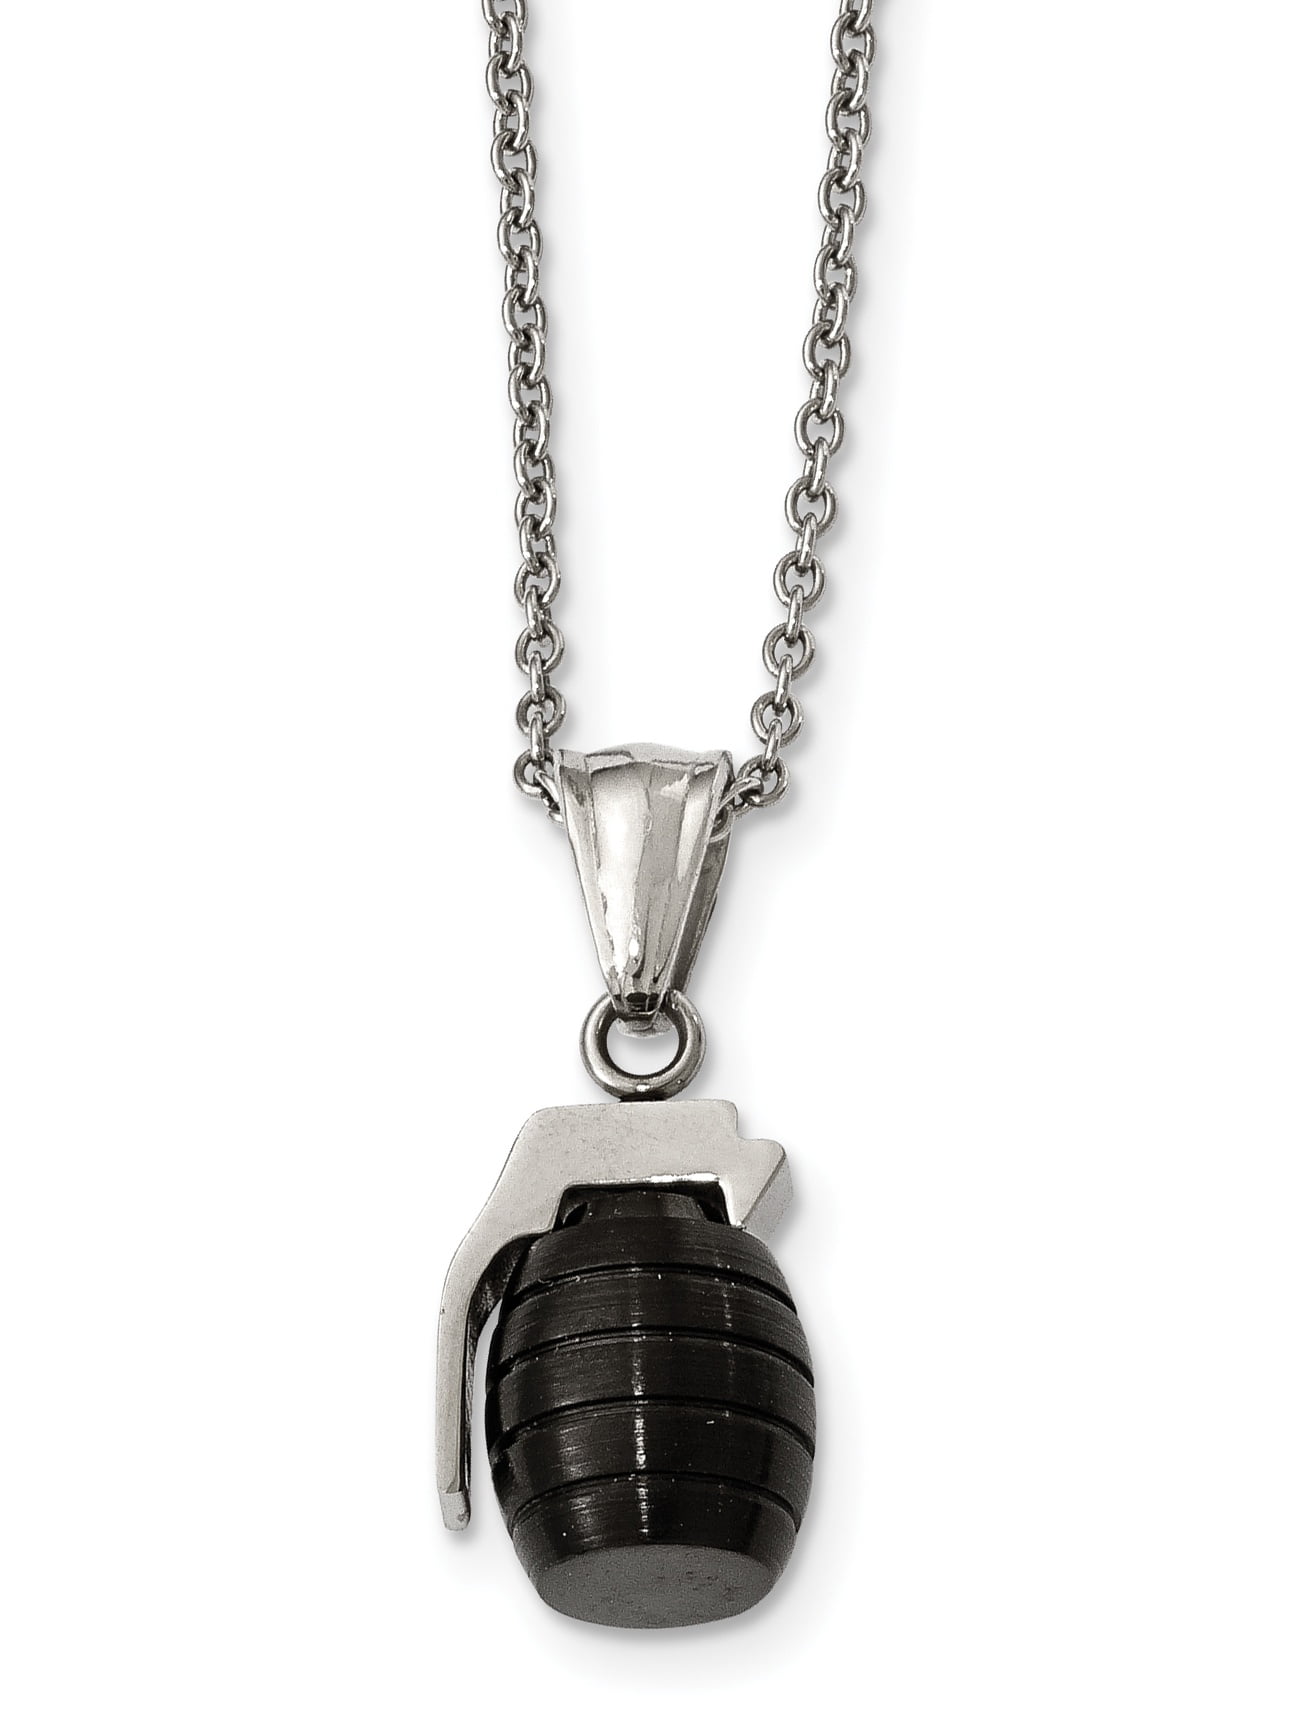 Stainless Steel Black IP Grenade Necklace 16 Inches 